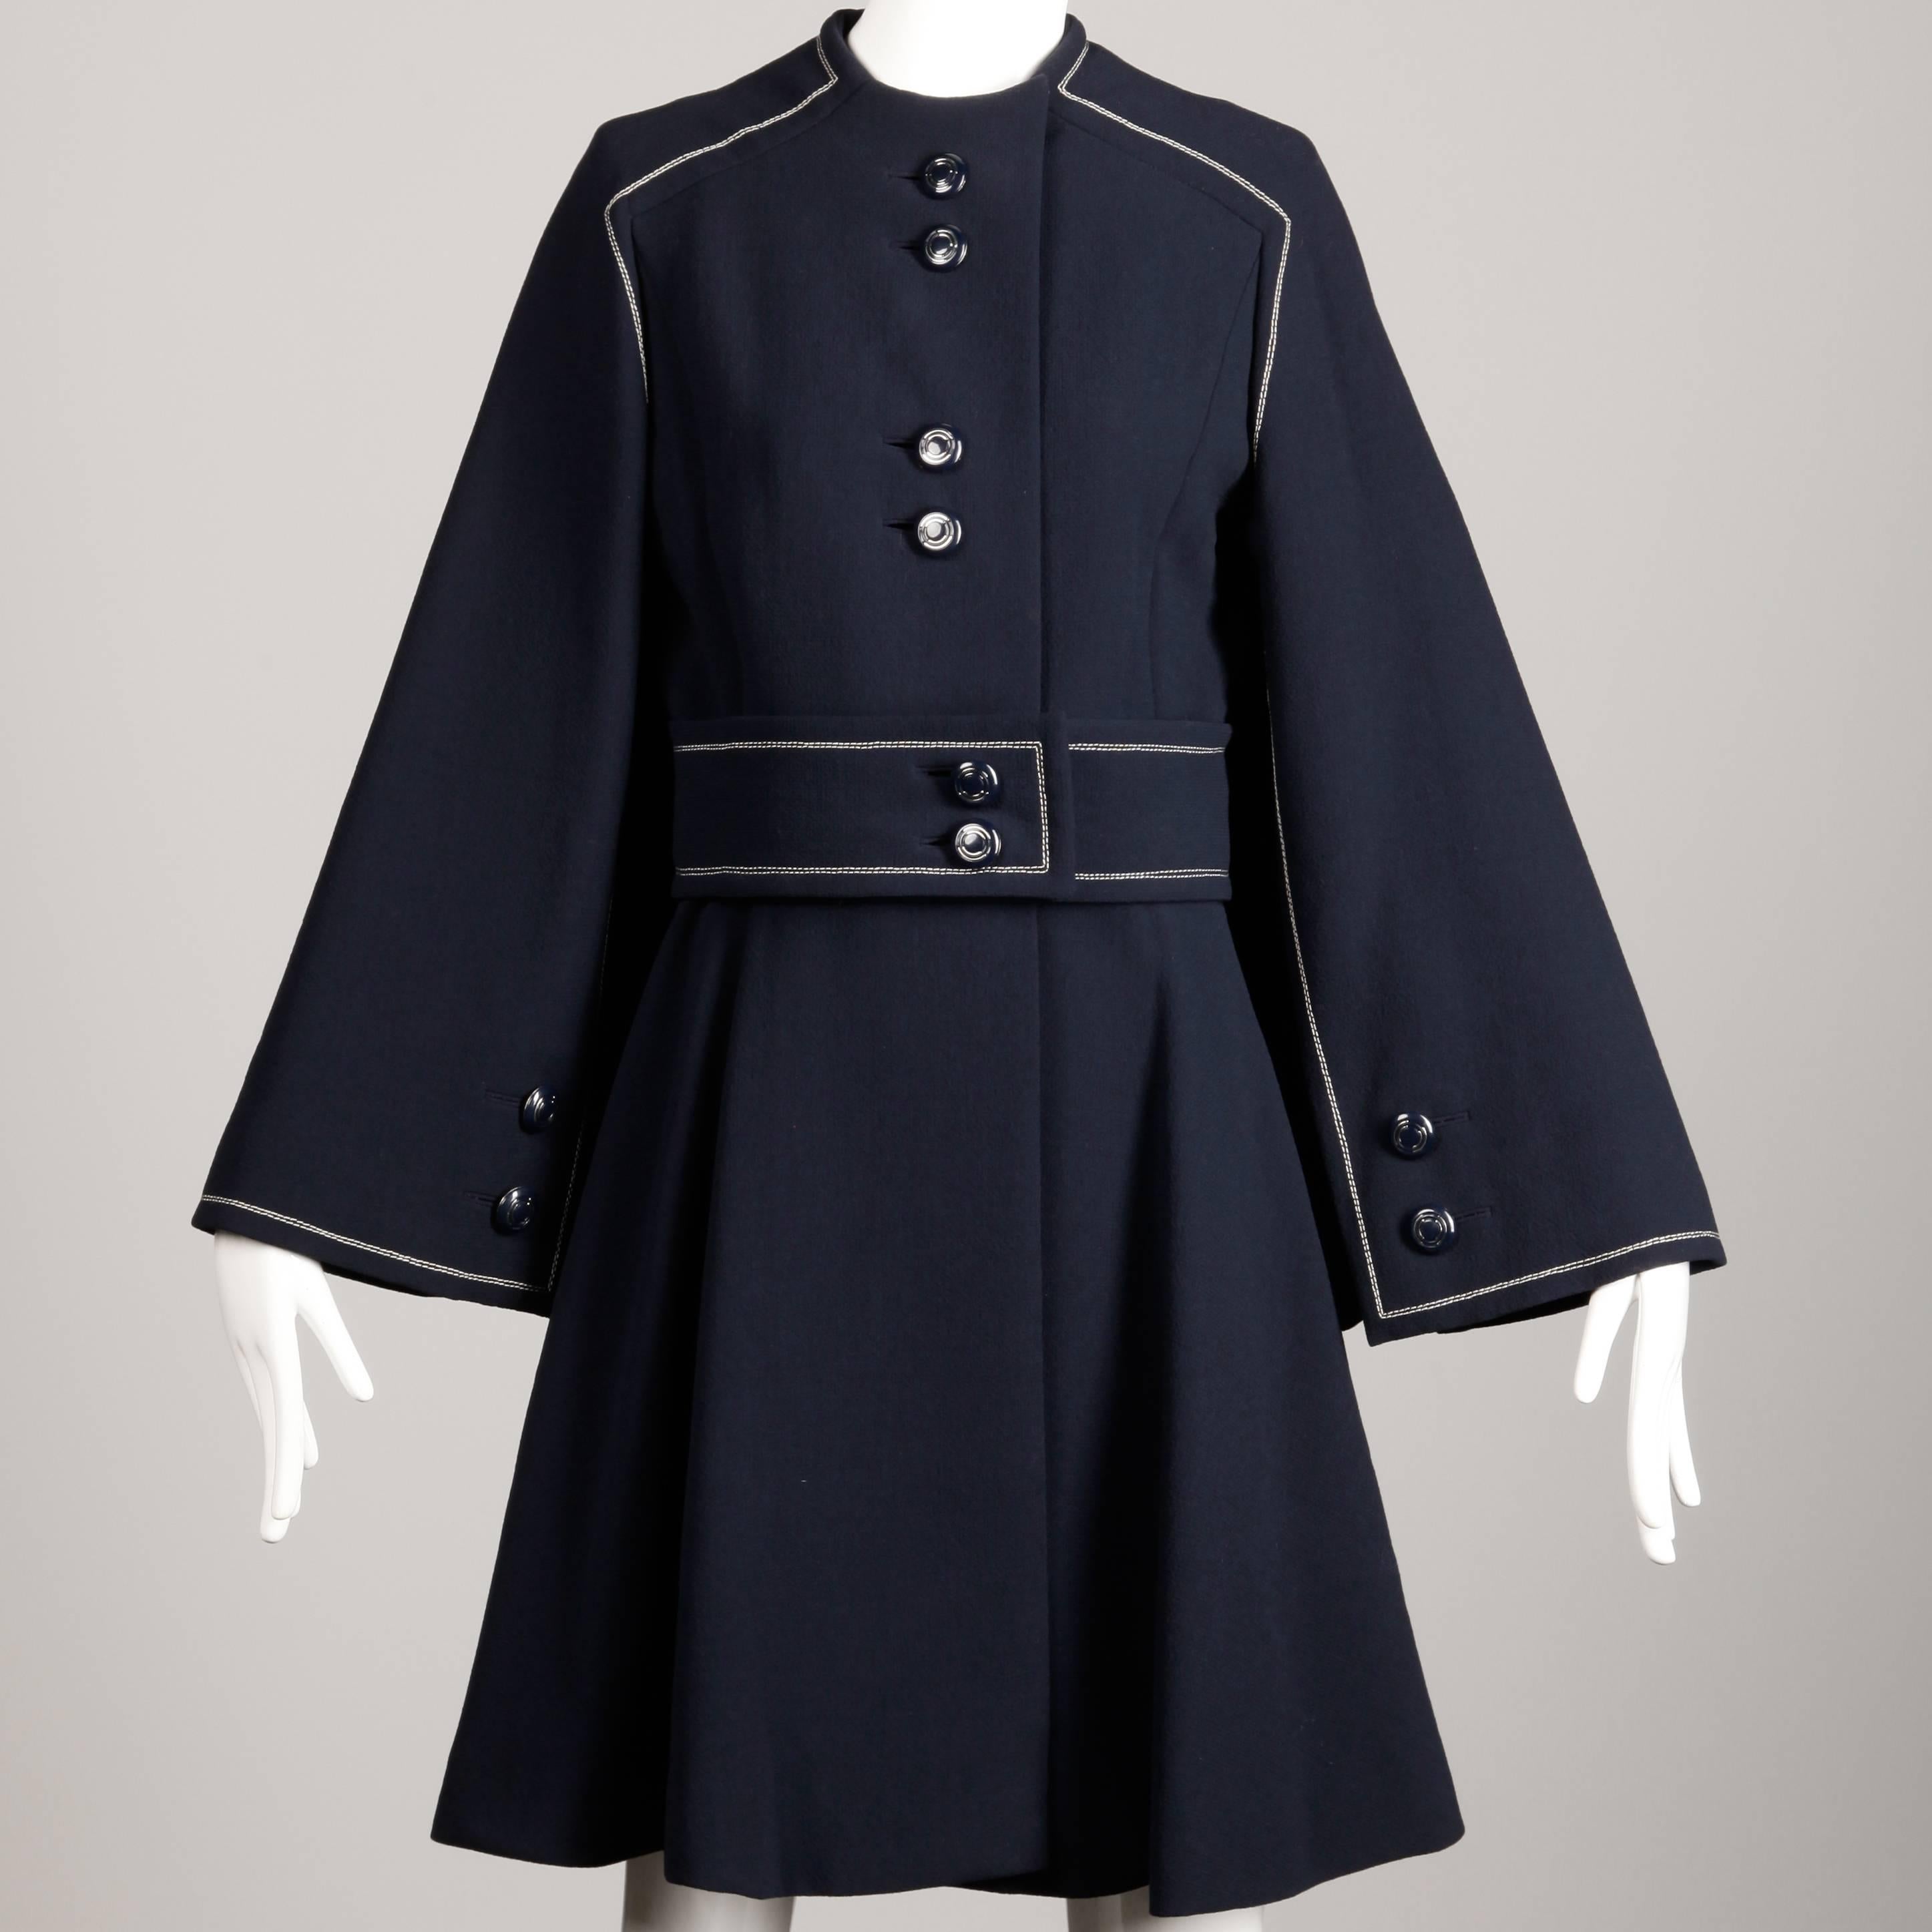 This is one of the most beautiful vintage pieces I have ever laid eyes on. The quality is absolutely exceptional and the condition is pristine. Ronald Amey designed this cape that converts to a coat when you button the sleeves. It is done in navy